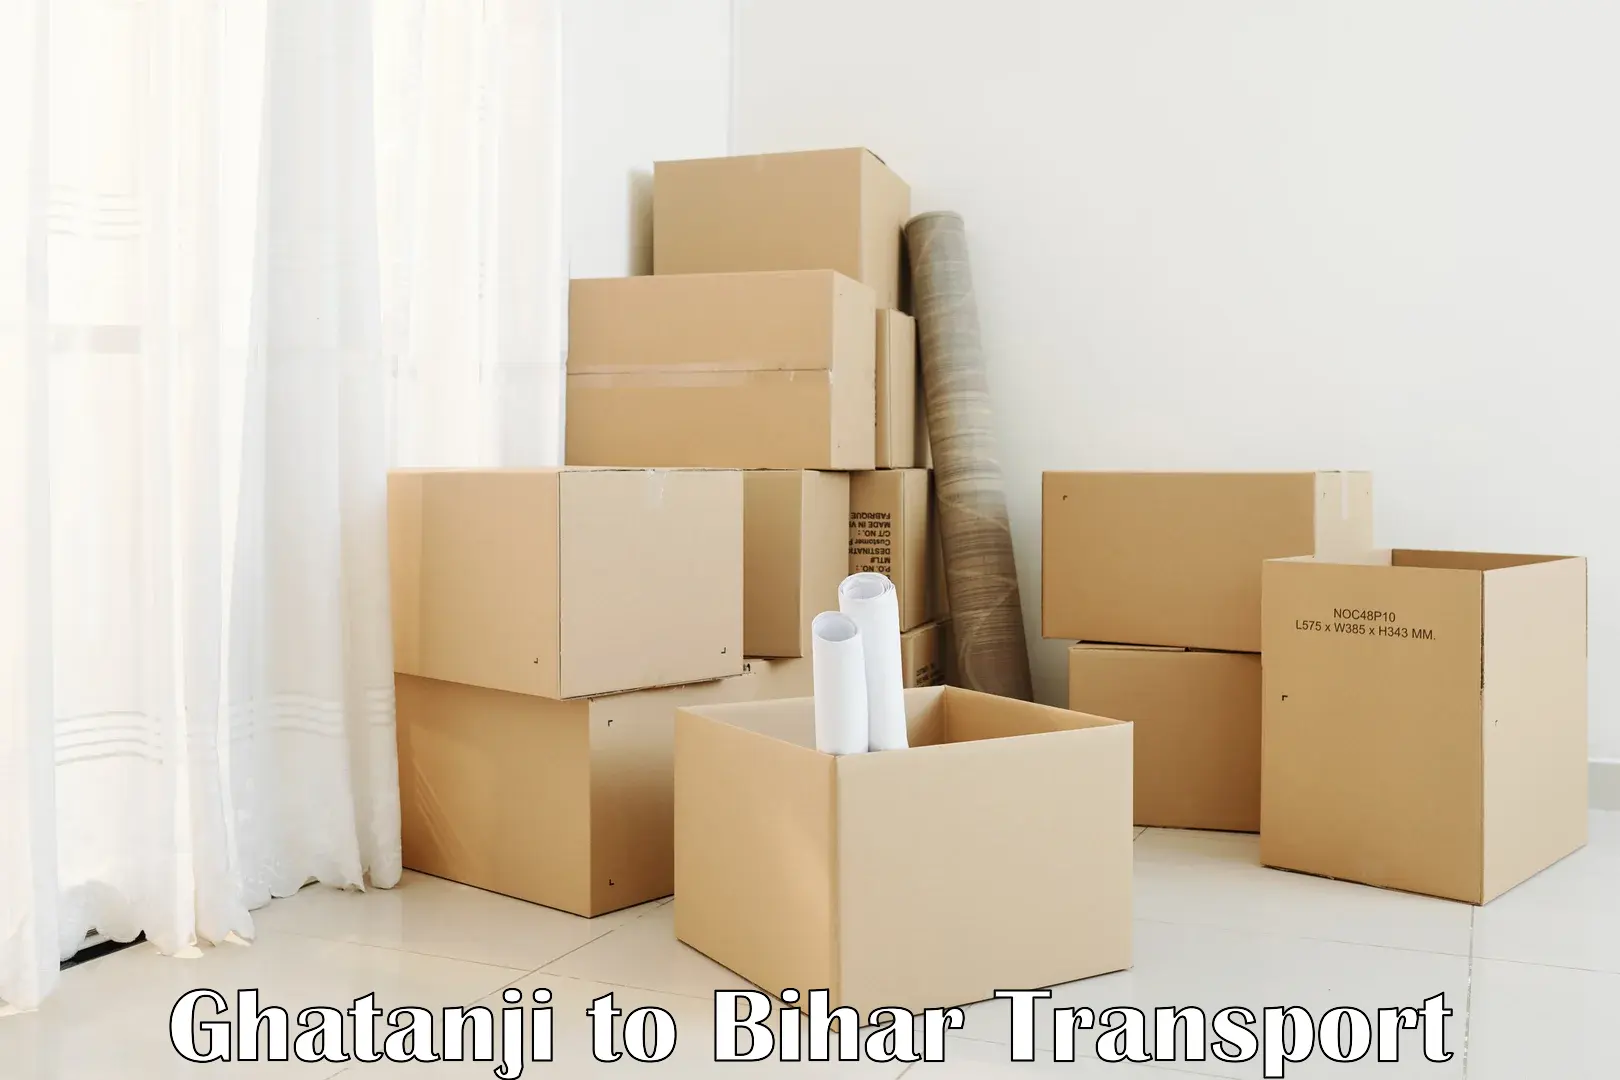 Vehicle transport services in Ghatanji to Bihar